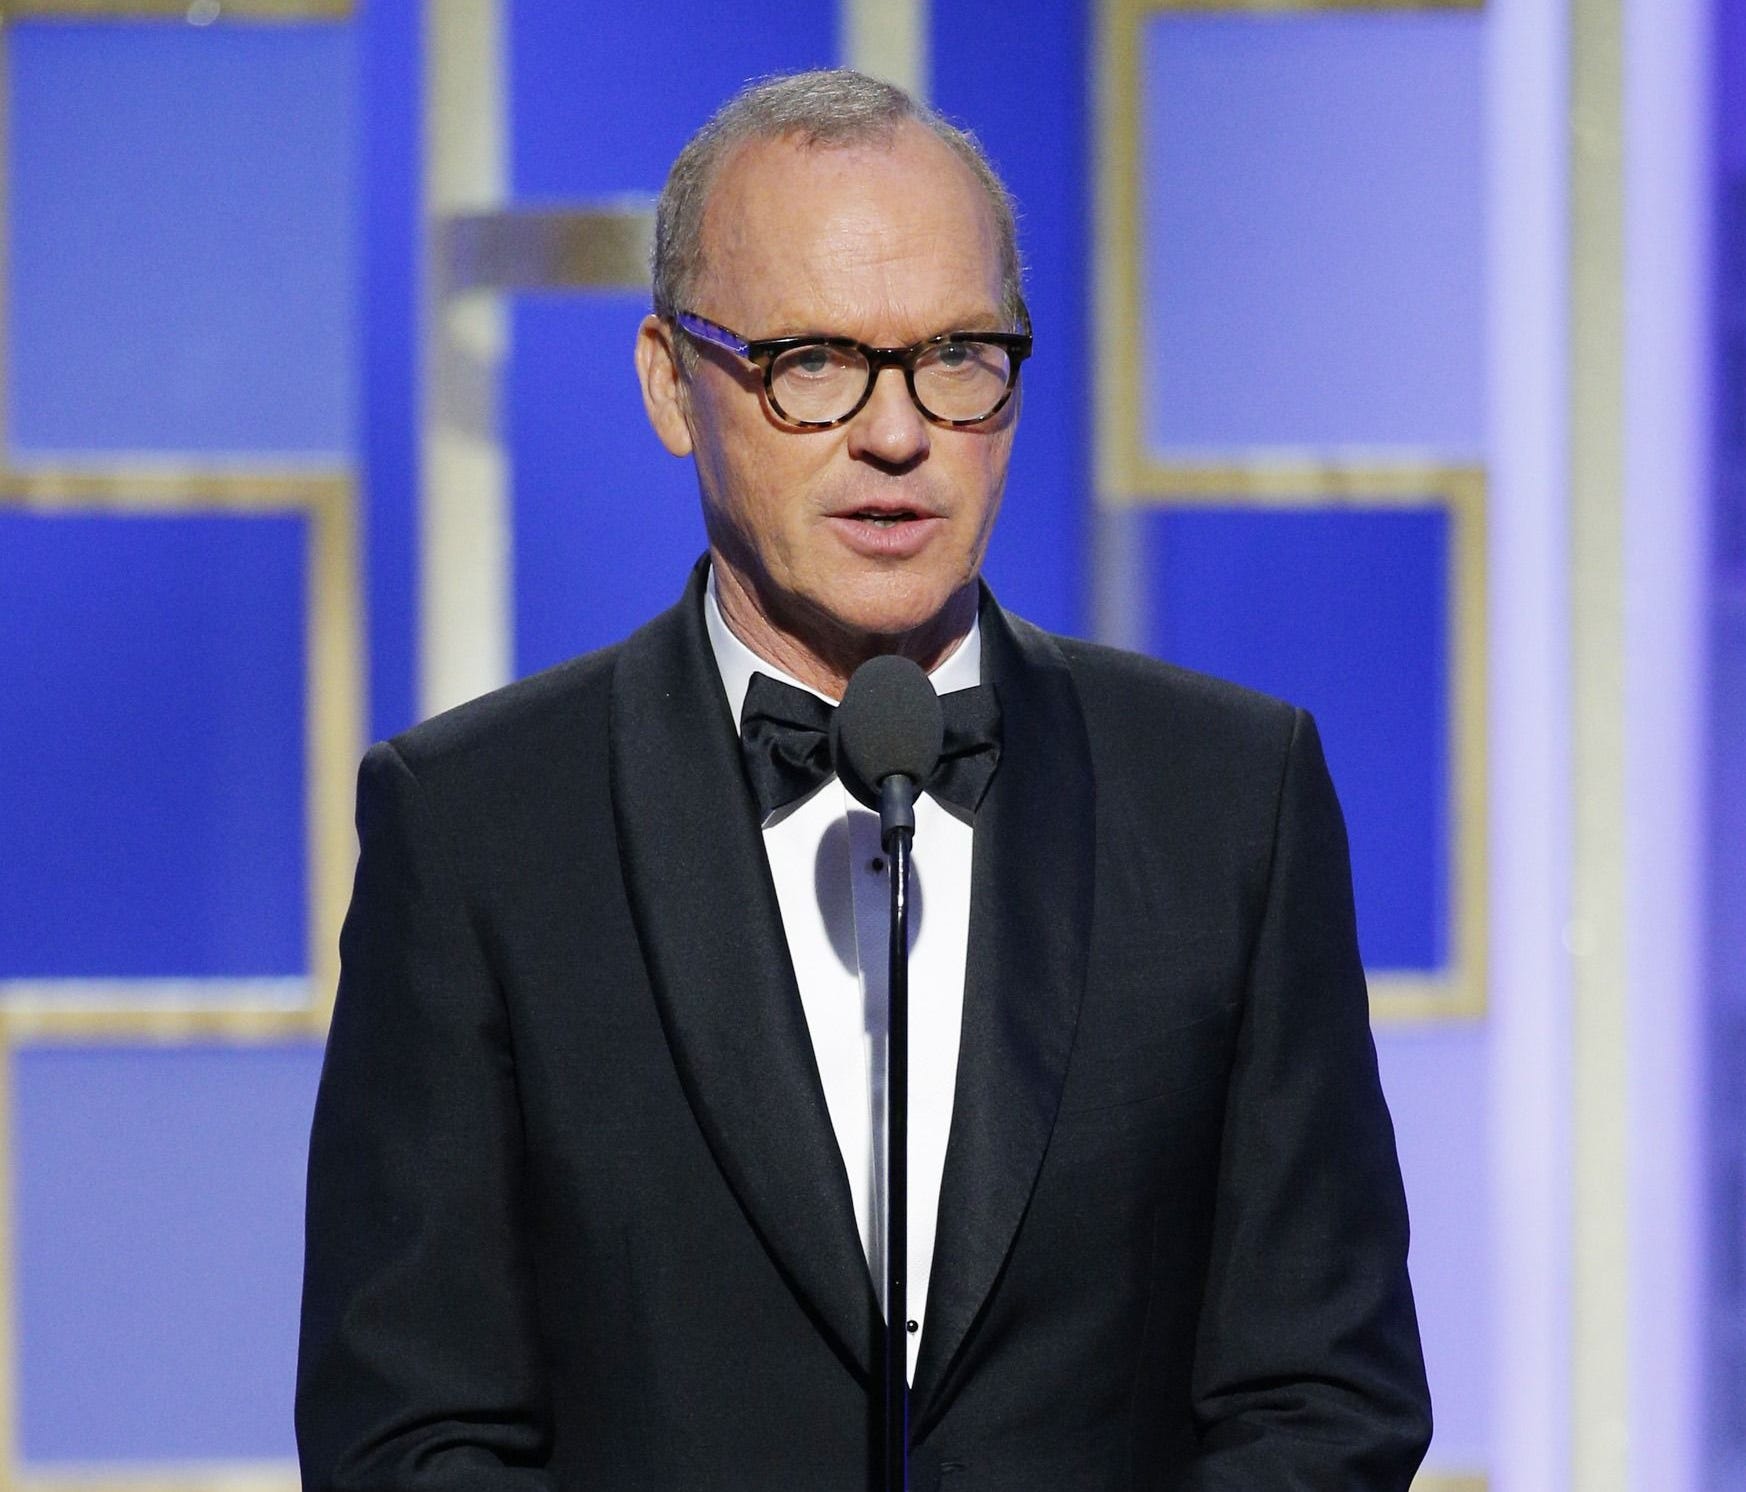 While presenting onstage at the Golden Globe Awards, Michael Keaton accidentally combined the names of two films that have predominantly black casts.